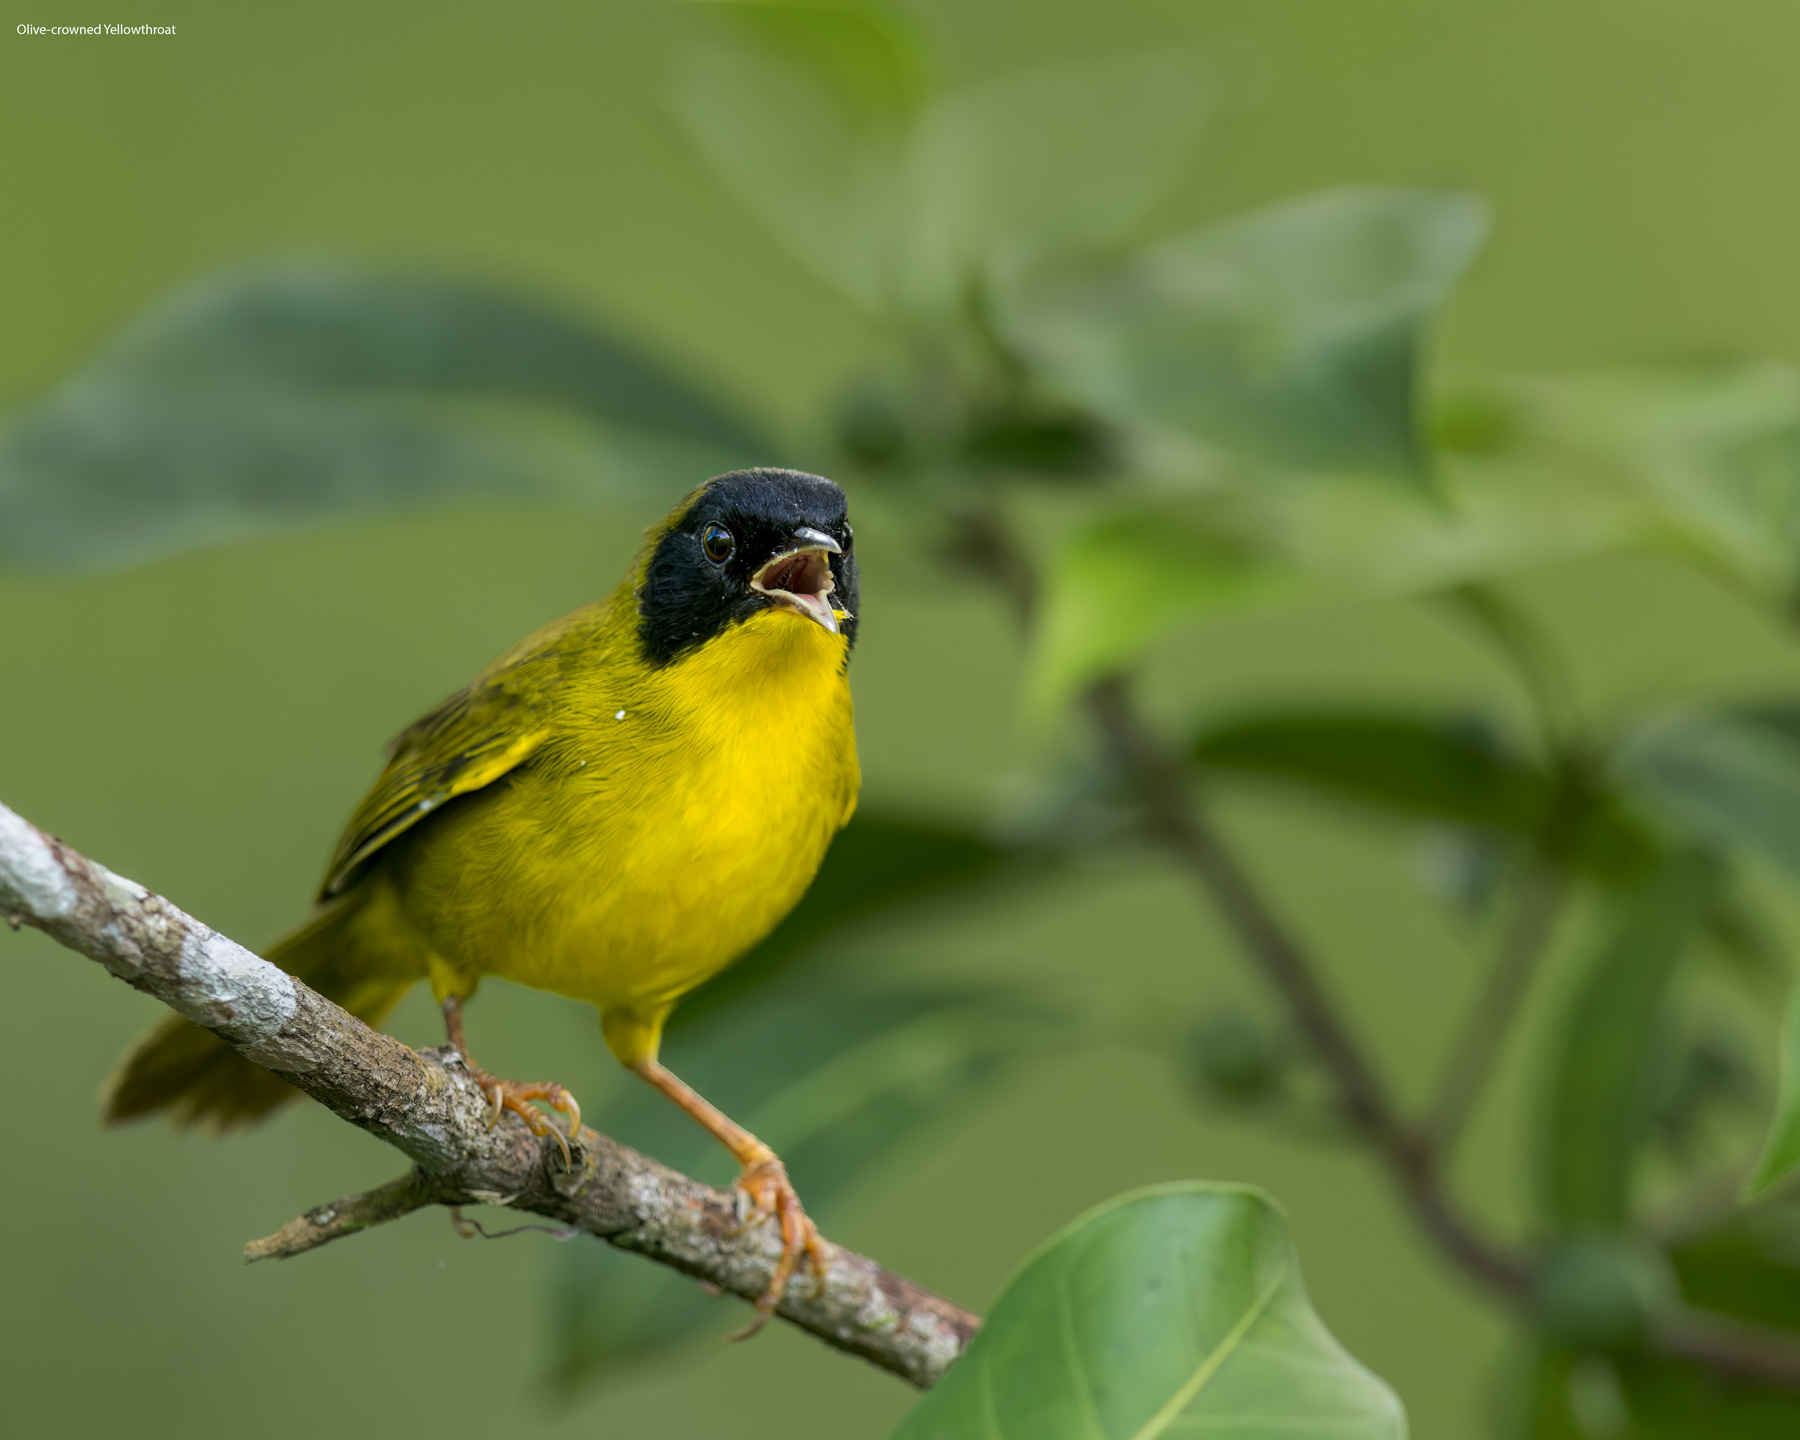 Olive-crowned-Yellowthroat.jpg